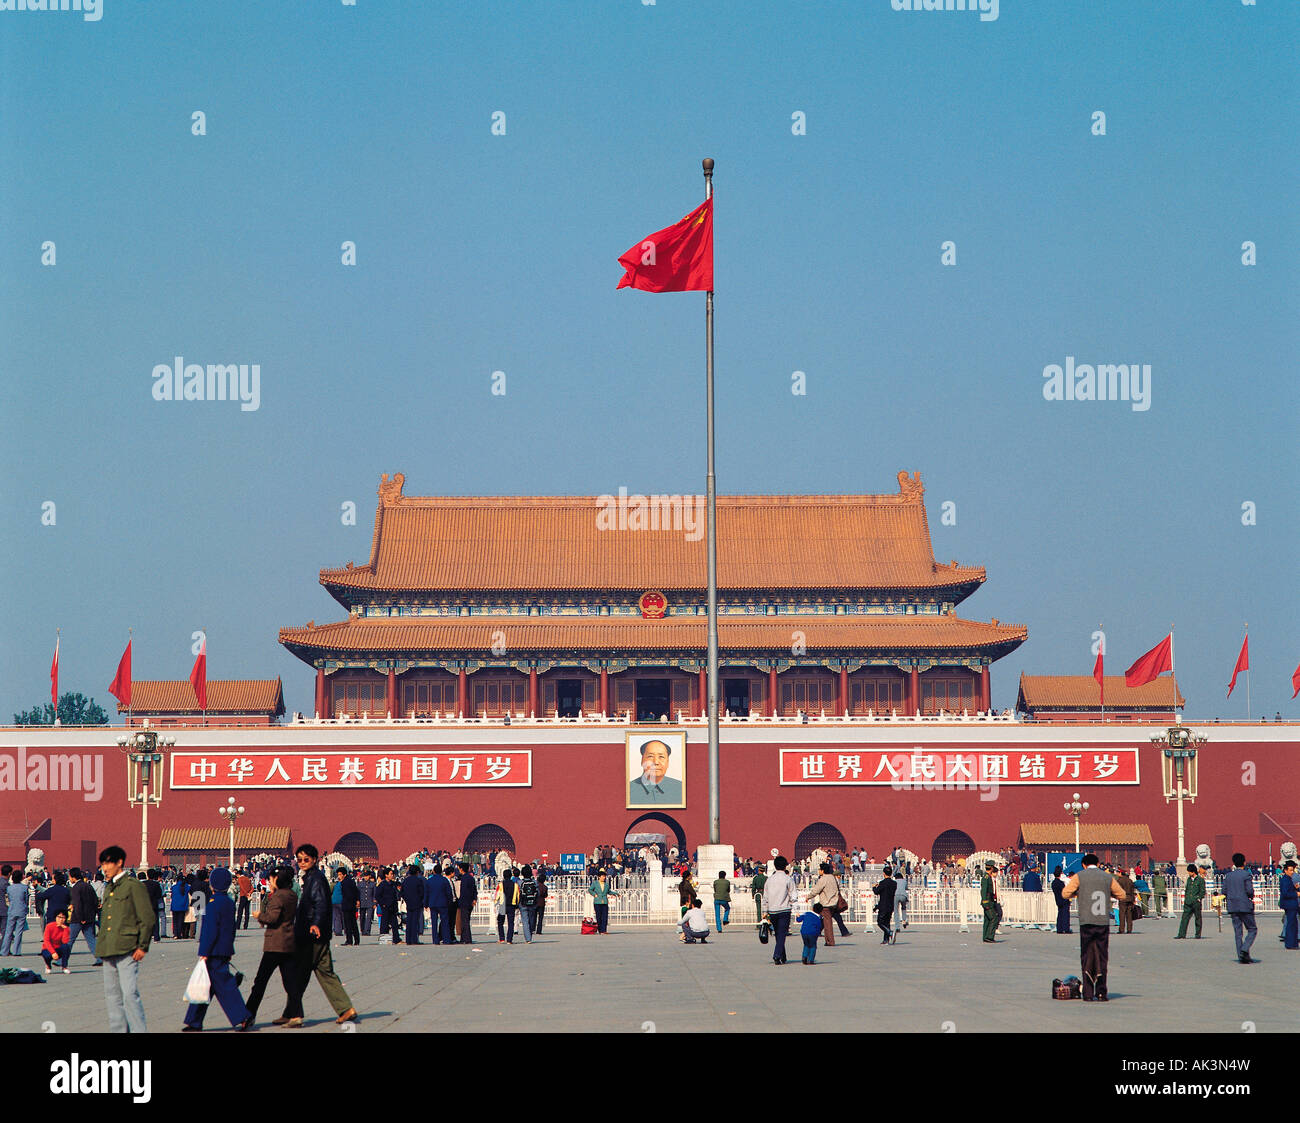 China. Beijing. Crowds in Tiananmen Square. The Forbidden City. Imperial Palace. Stock Photo